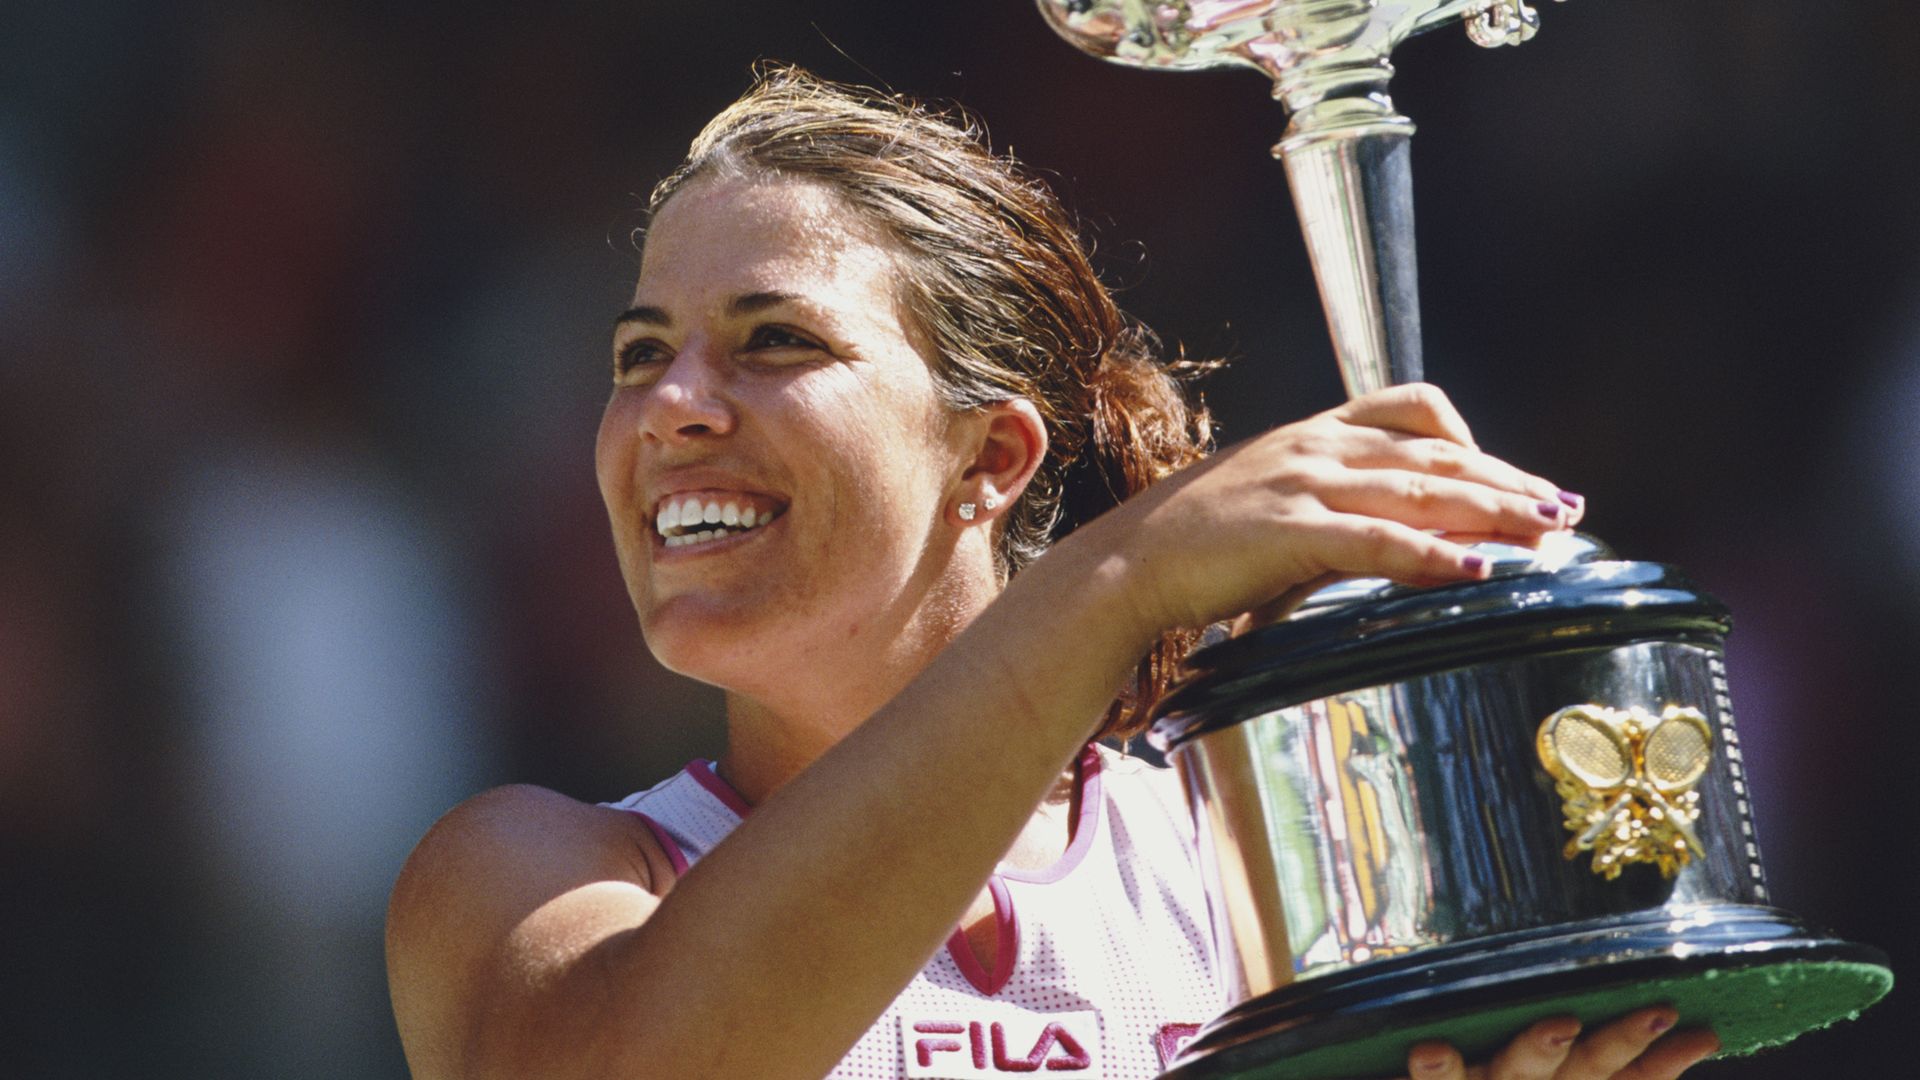 Jennifer Capriati of the United States lifts the trophy after winning the Women's Singles title against Martina Hingis at the Australian Open tennis tournament on 25 January 2002 at the National Tennis Centre at Melbourne Park, Melbourne, Australia